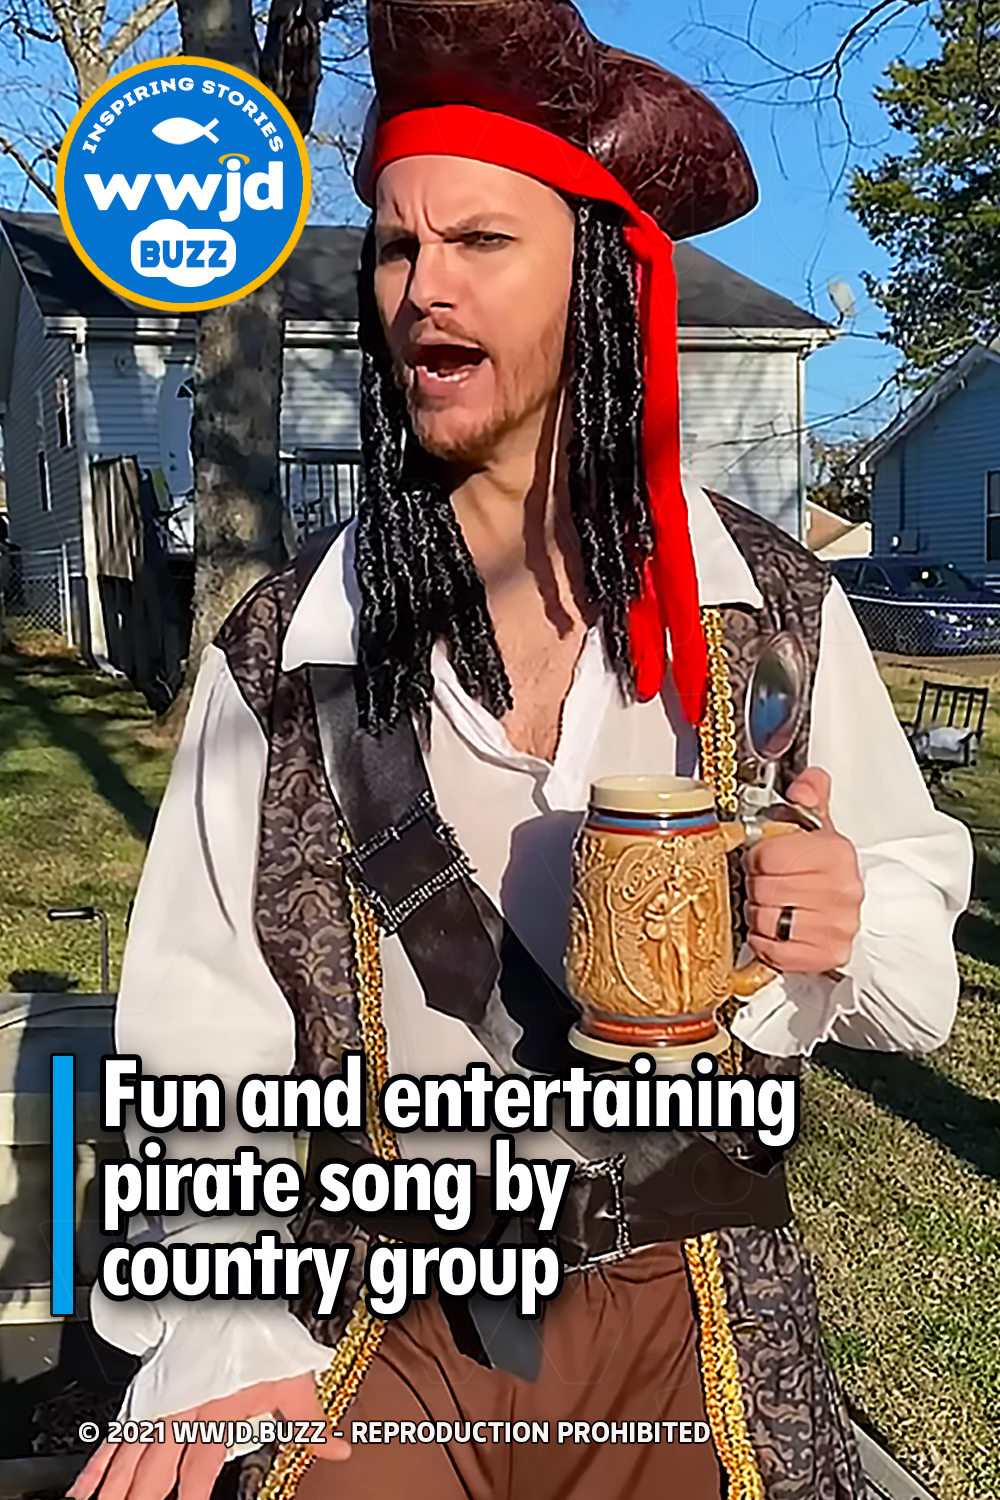 Fun and entertaining pirate song by country group